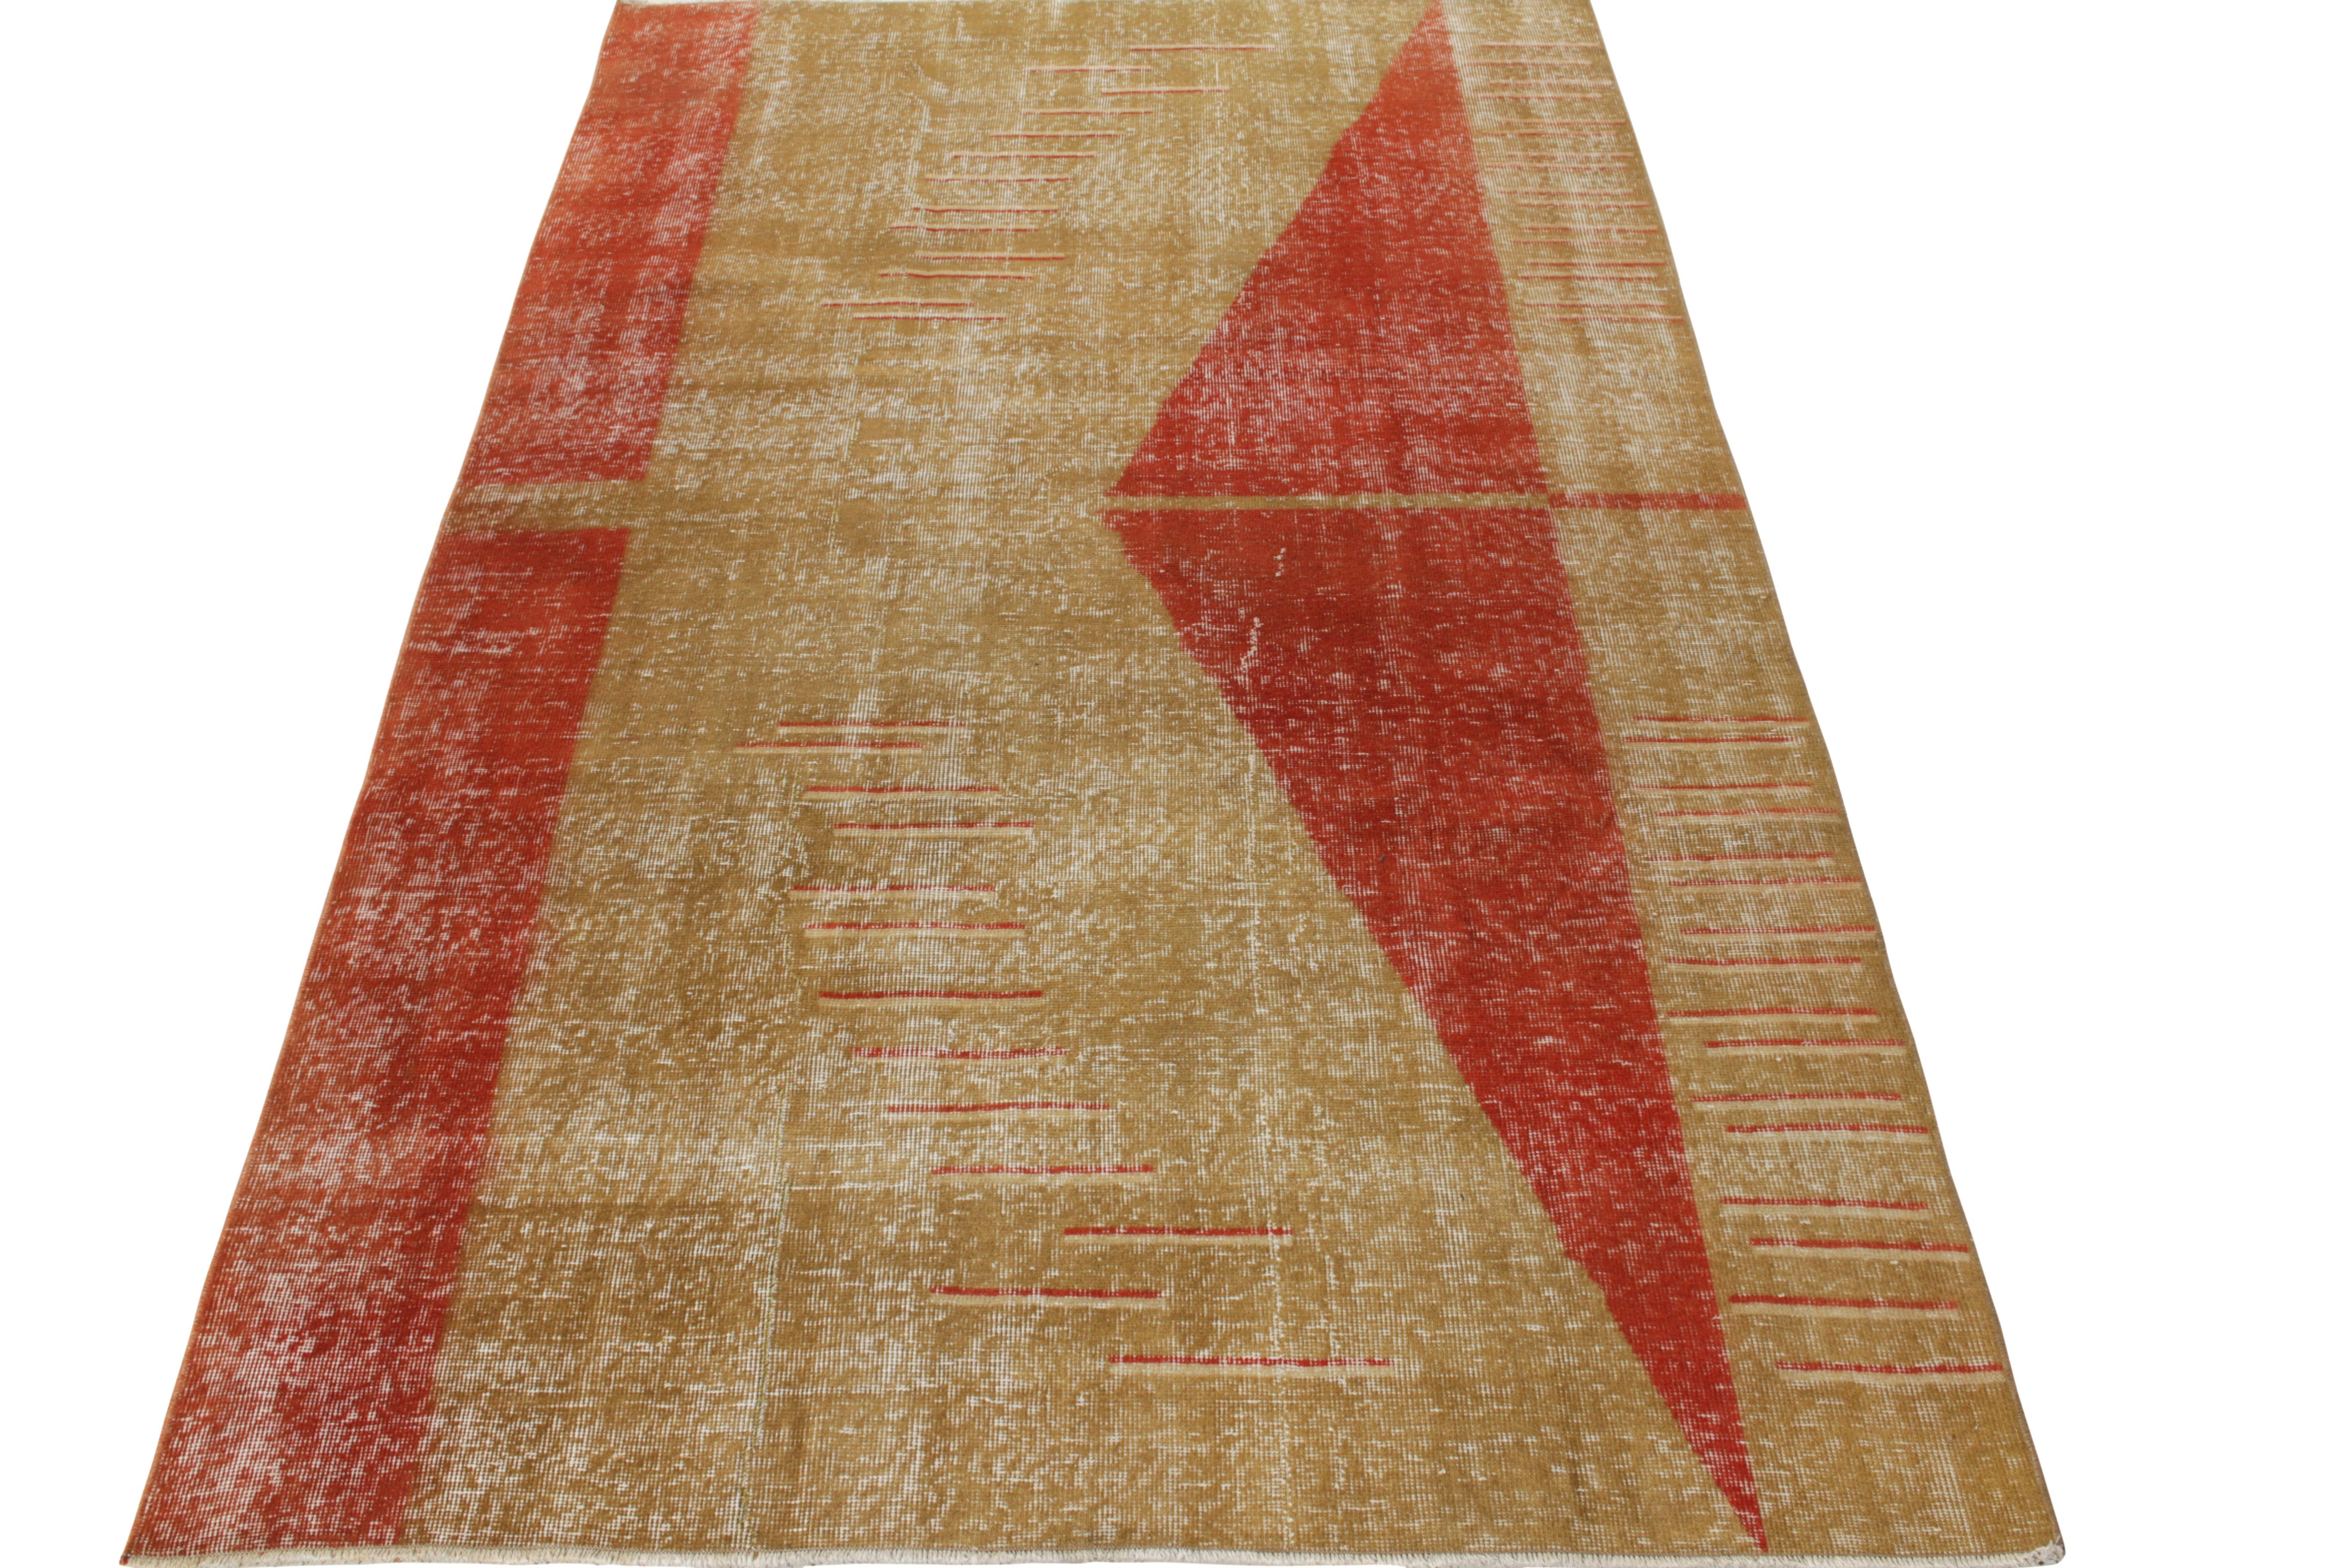 A specimen of artisanal conviction, this 5x8 vintage distressed rug emanates the exclusivity of the Turkish style in the 1960s. Employing fine quality wool, this phenomenal drawing from a renowned Turkish designer witnesses a distinctive geometric